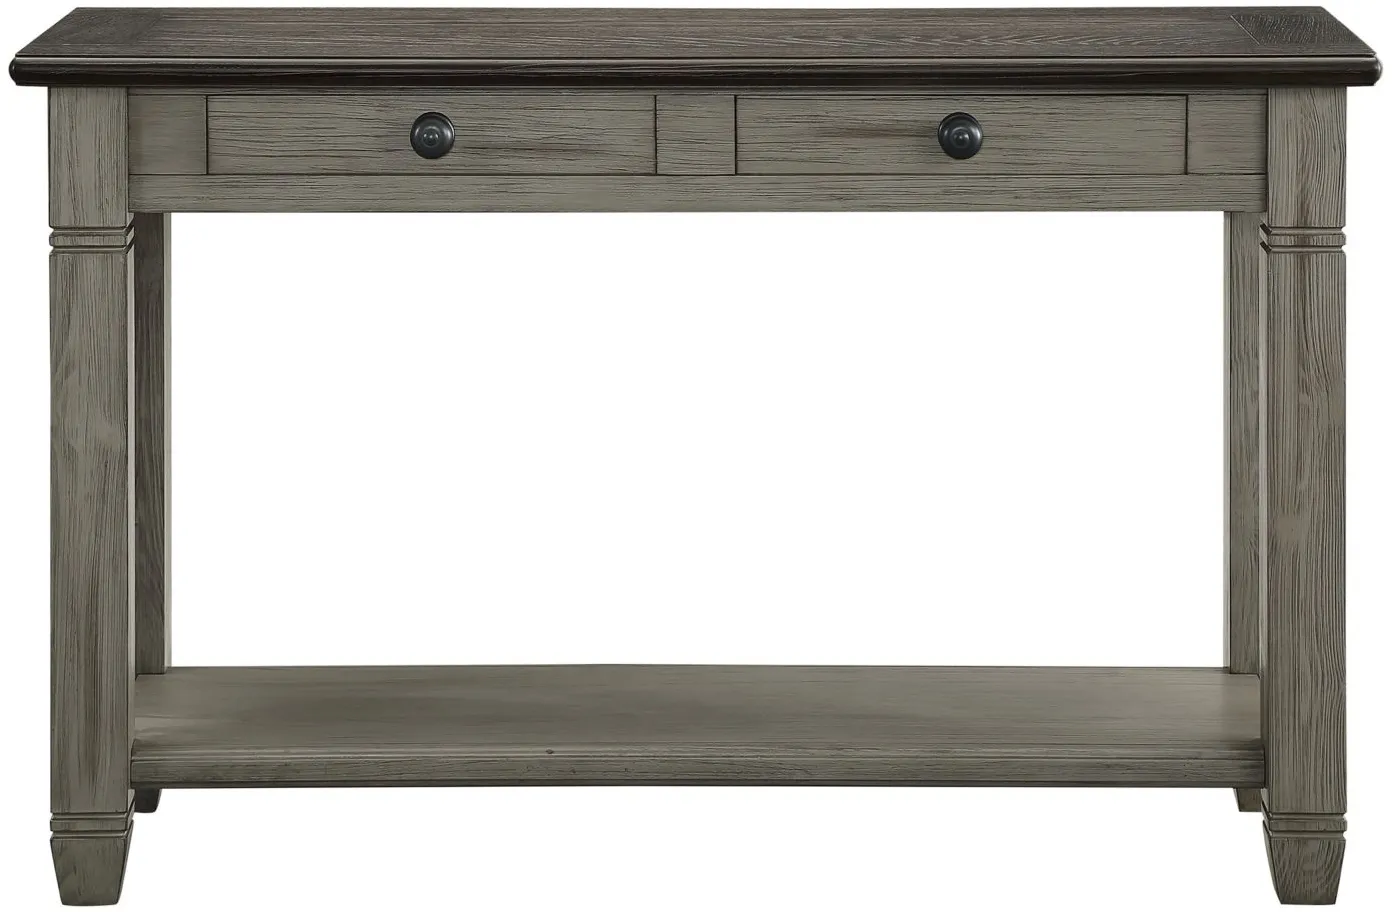 Lark Sofa Table in 2-Tone Finish (Coffee and Antique Gray) by Homelegance